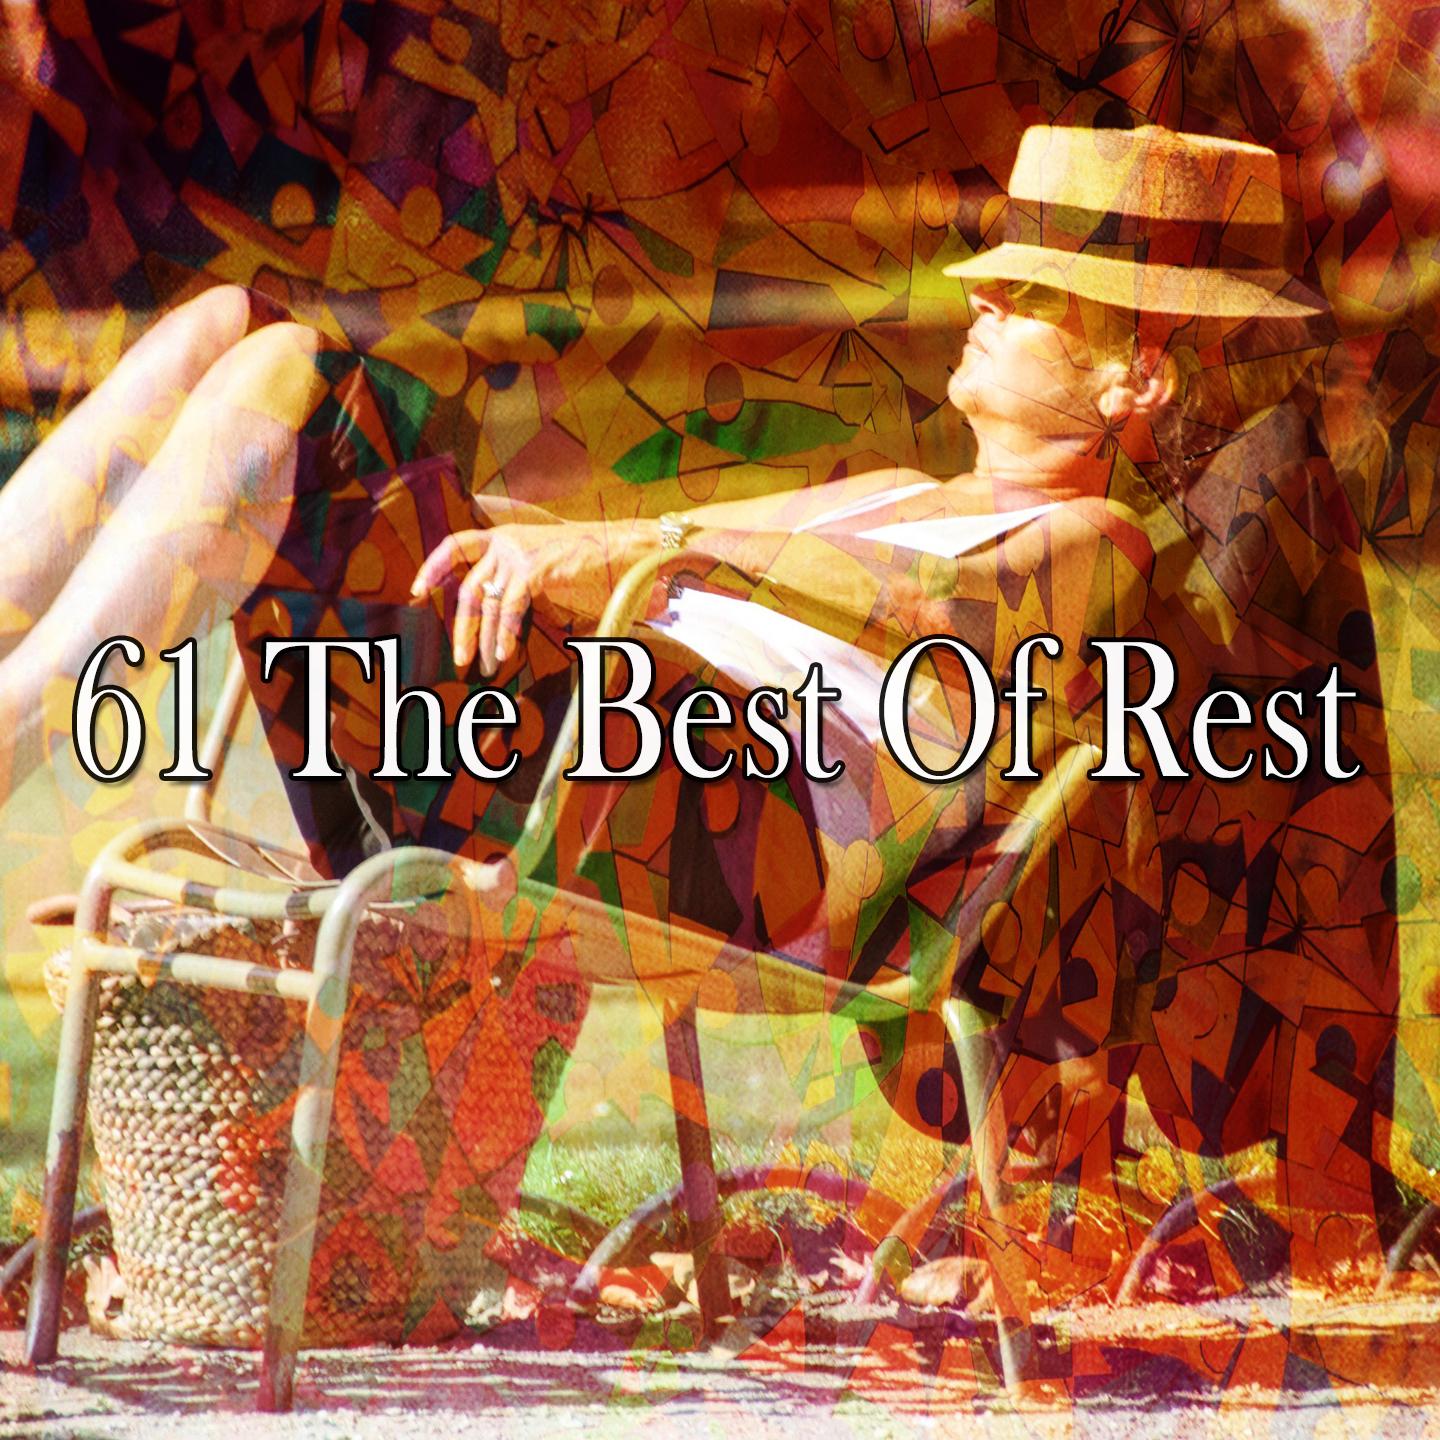 61 The Best of Rest